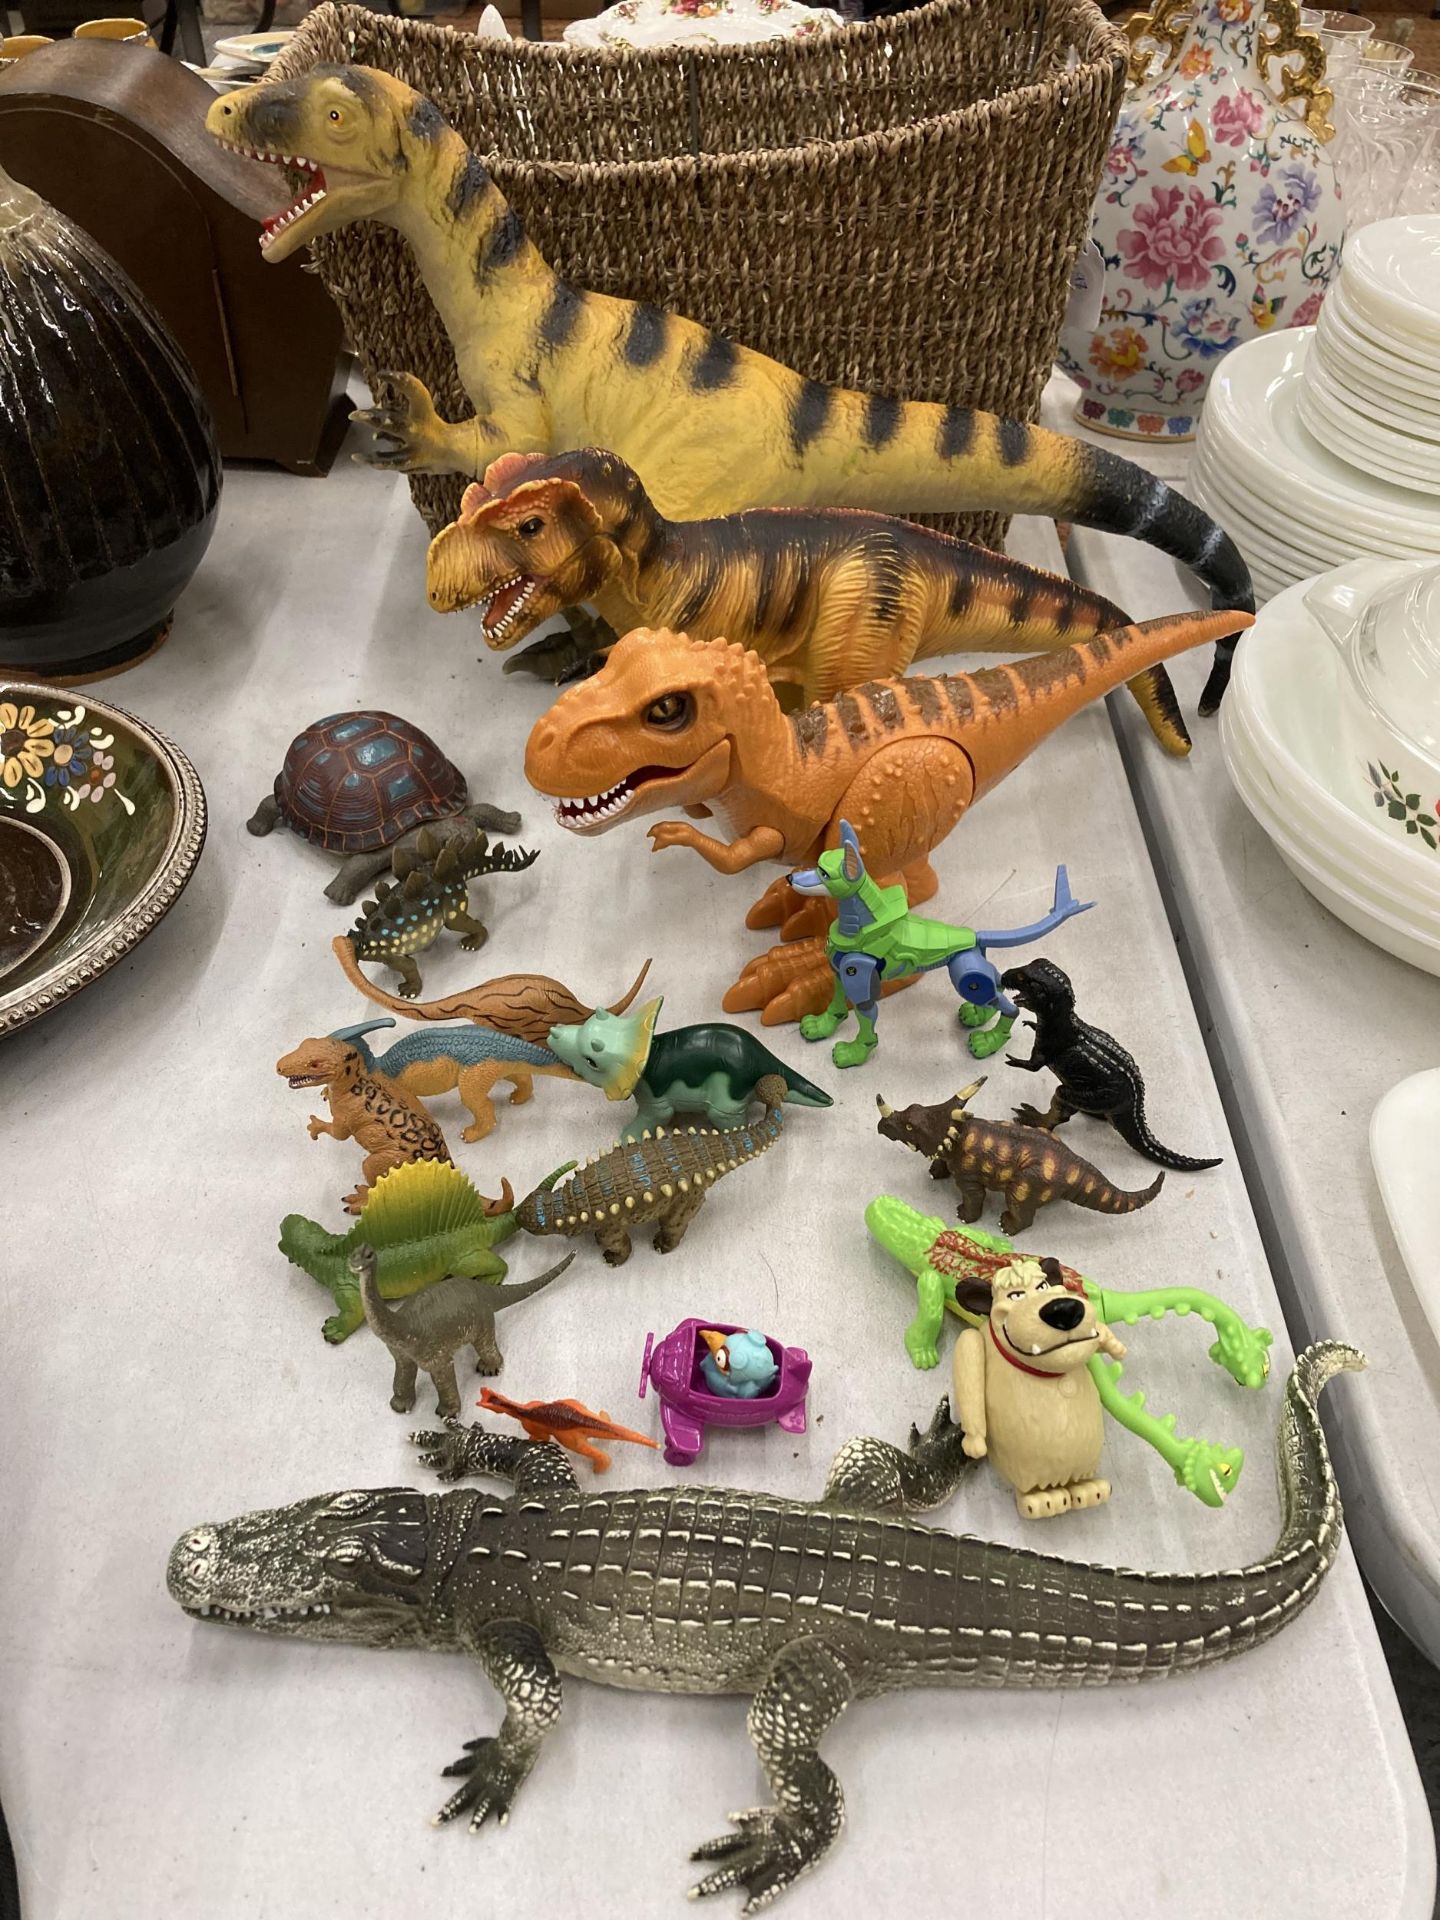 A COLLECTION OF DINOSAURS, ETC IN A BASKET